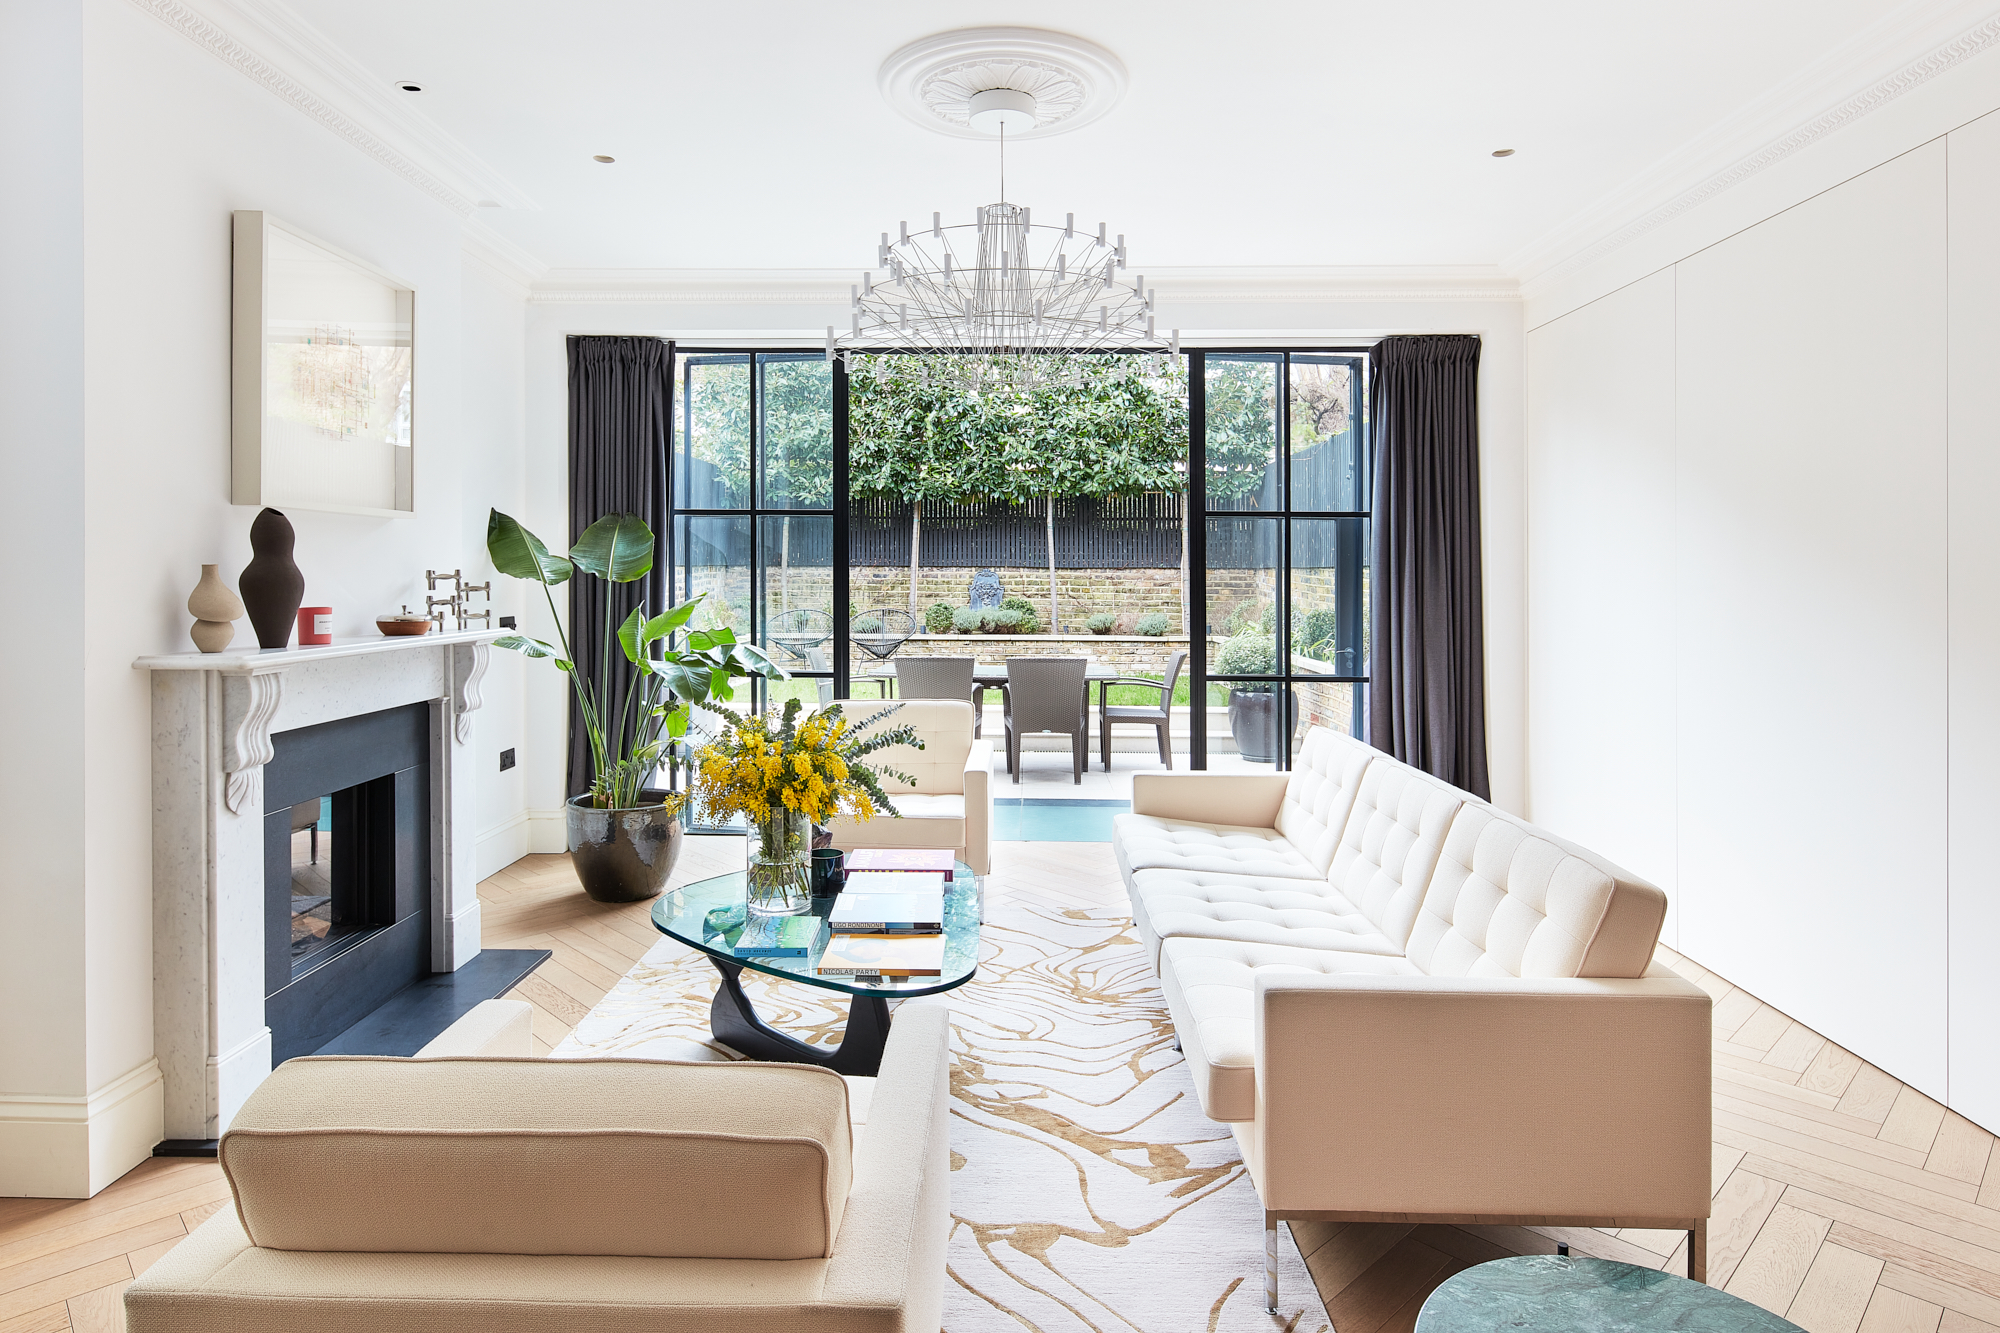 Design-forward living room of a West London home